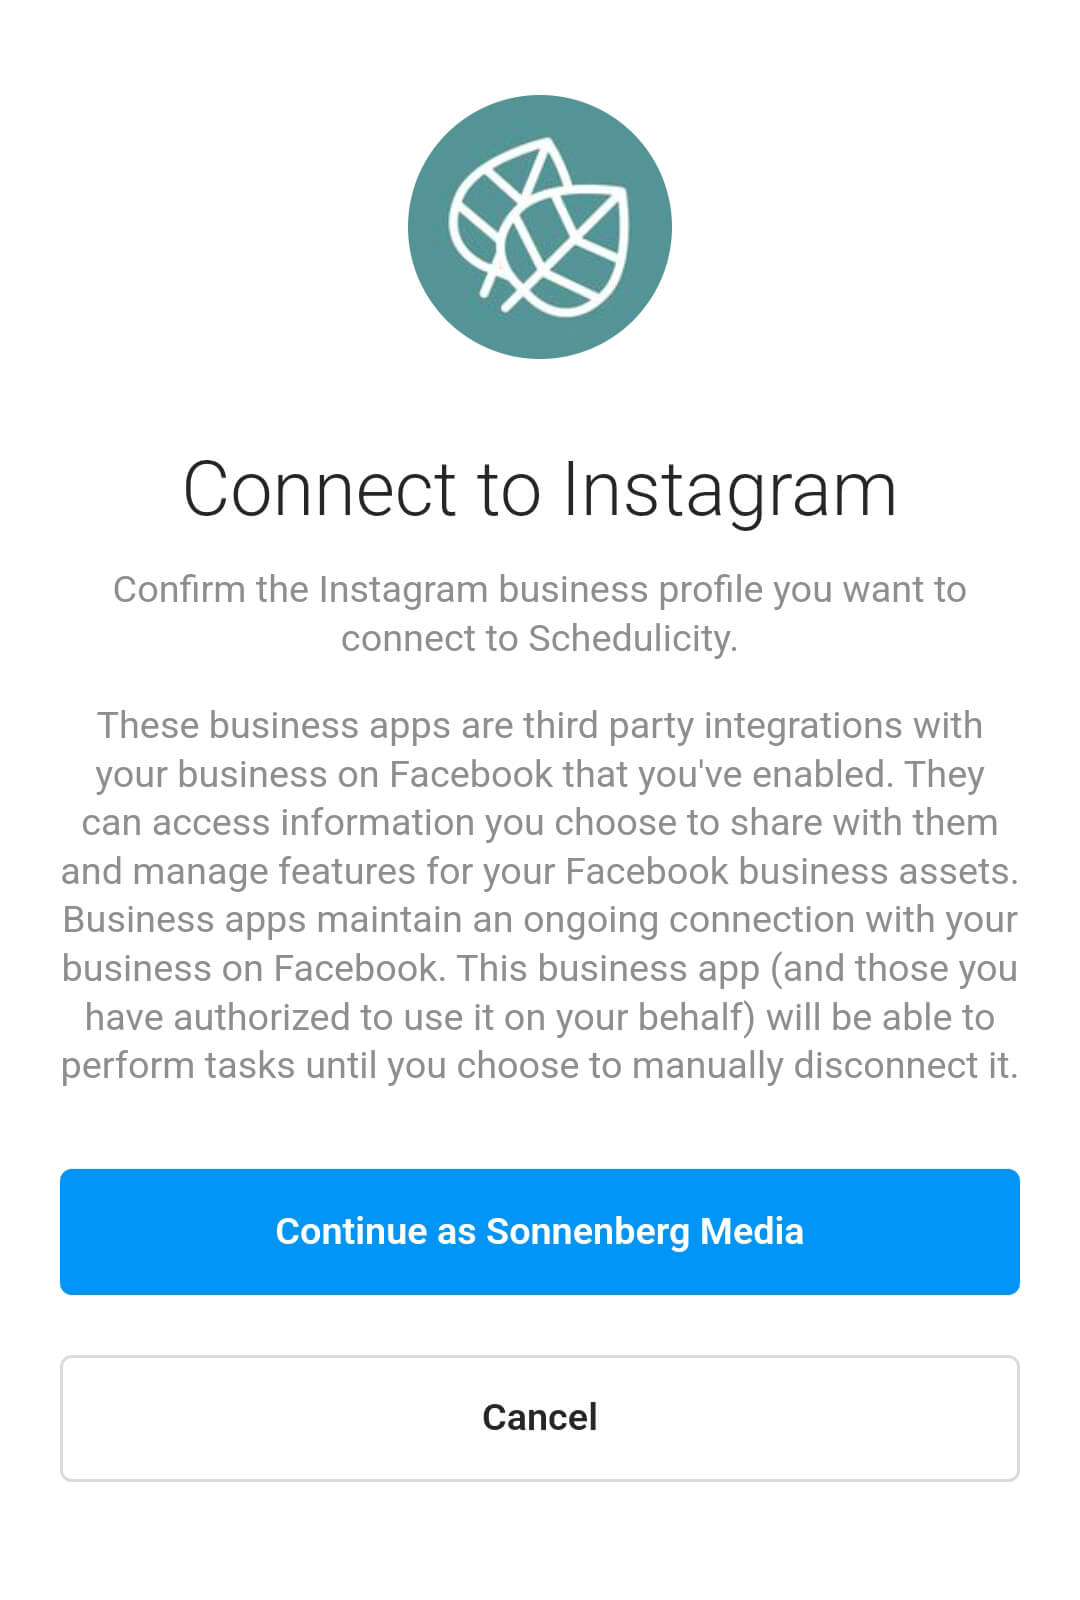 how-to-add-the-book-now-action-buttton-on-instagram-connect-professional-profile-to-third-party-platform-sonnenbergmedia-example-5